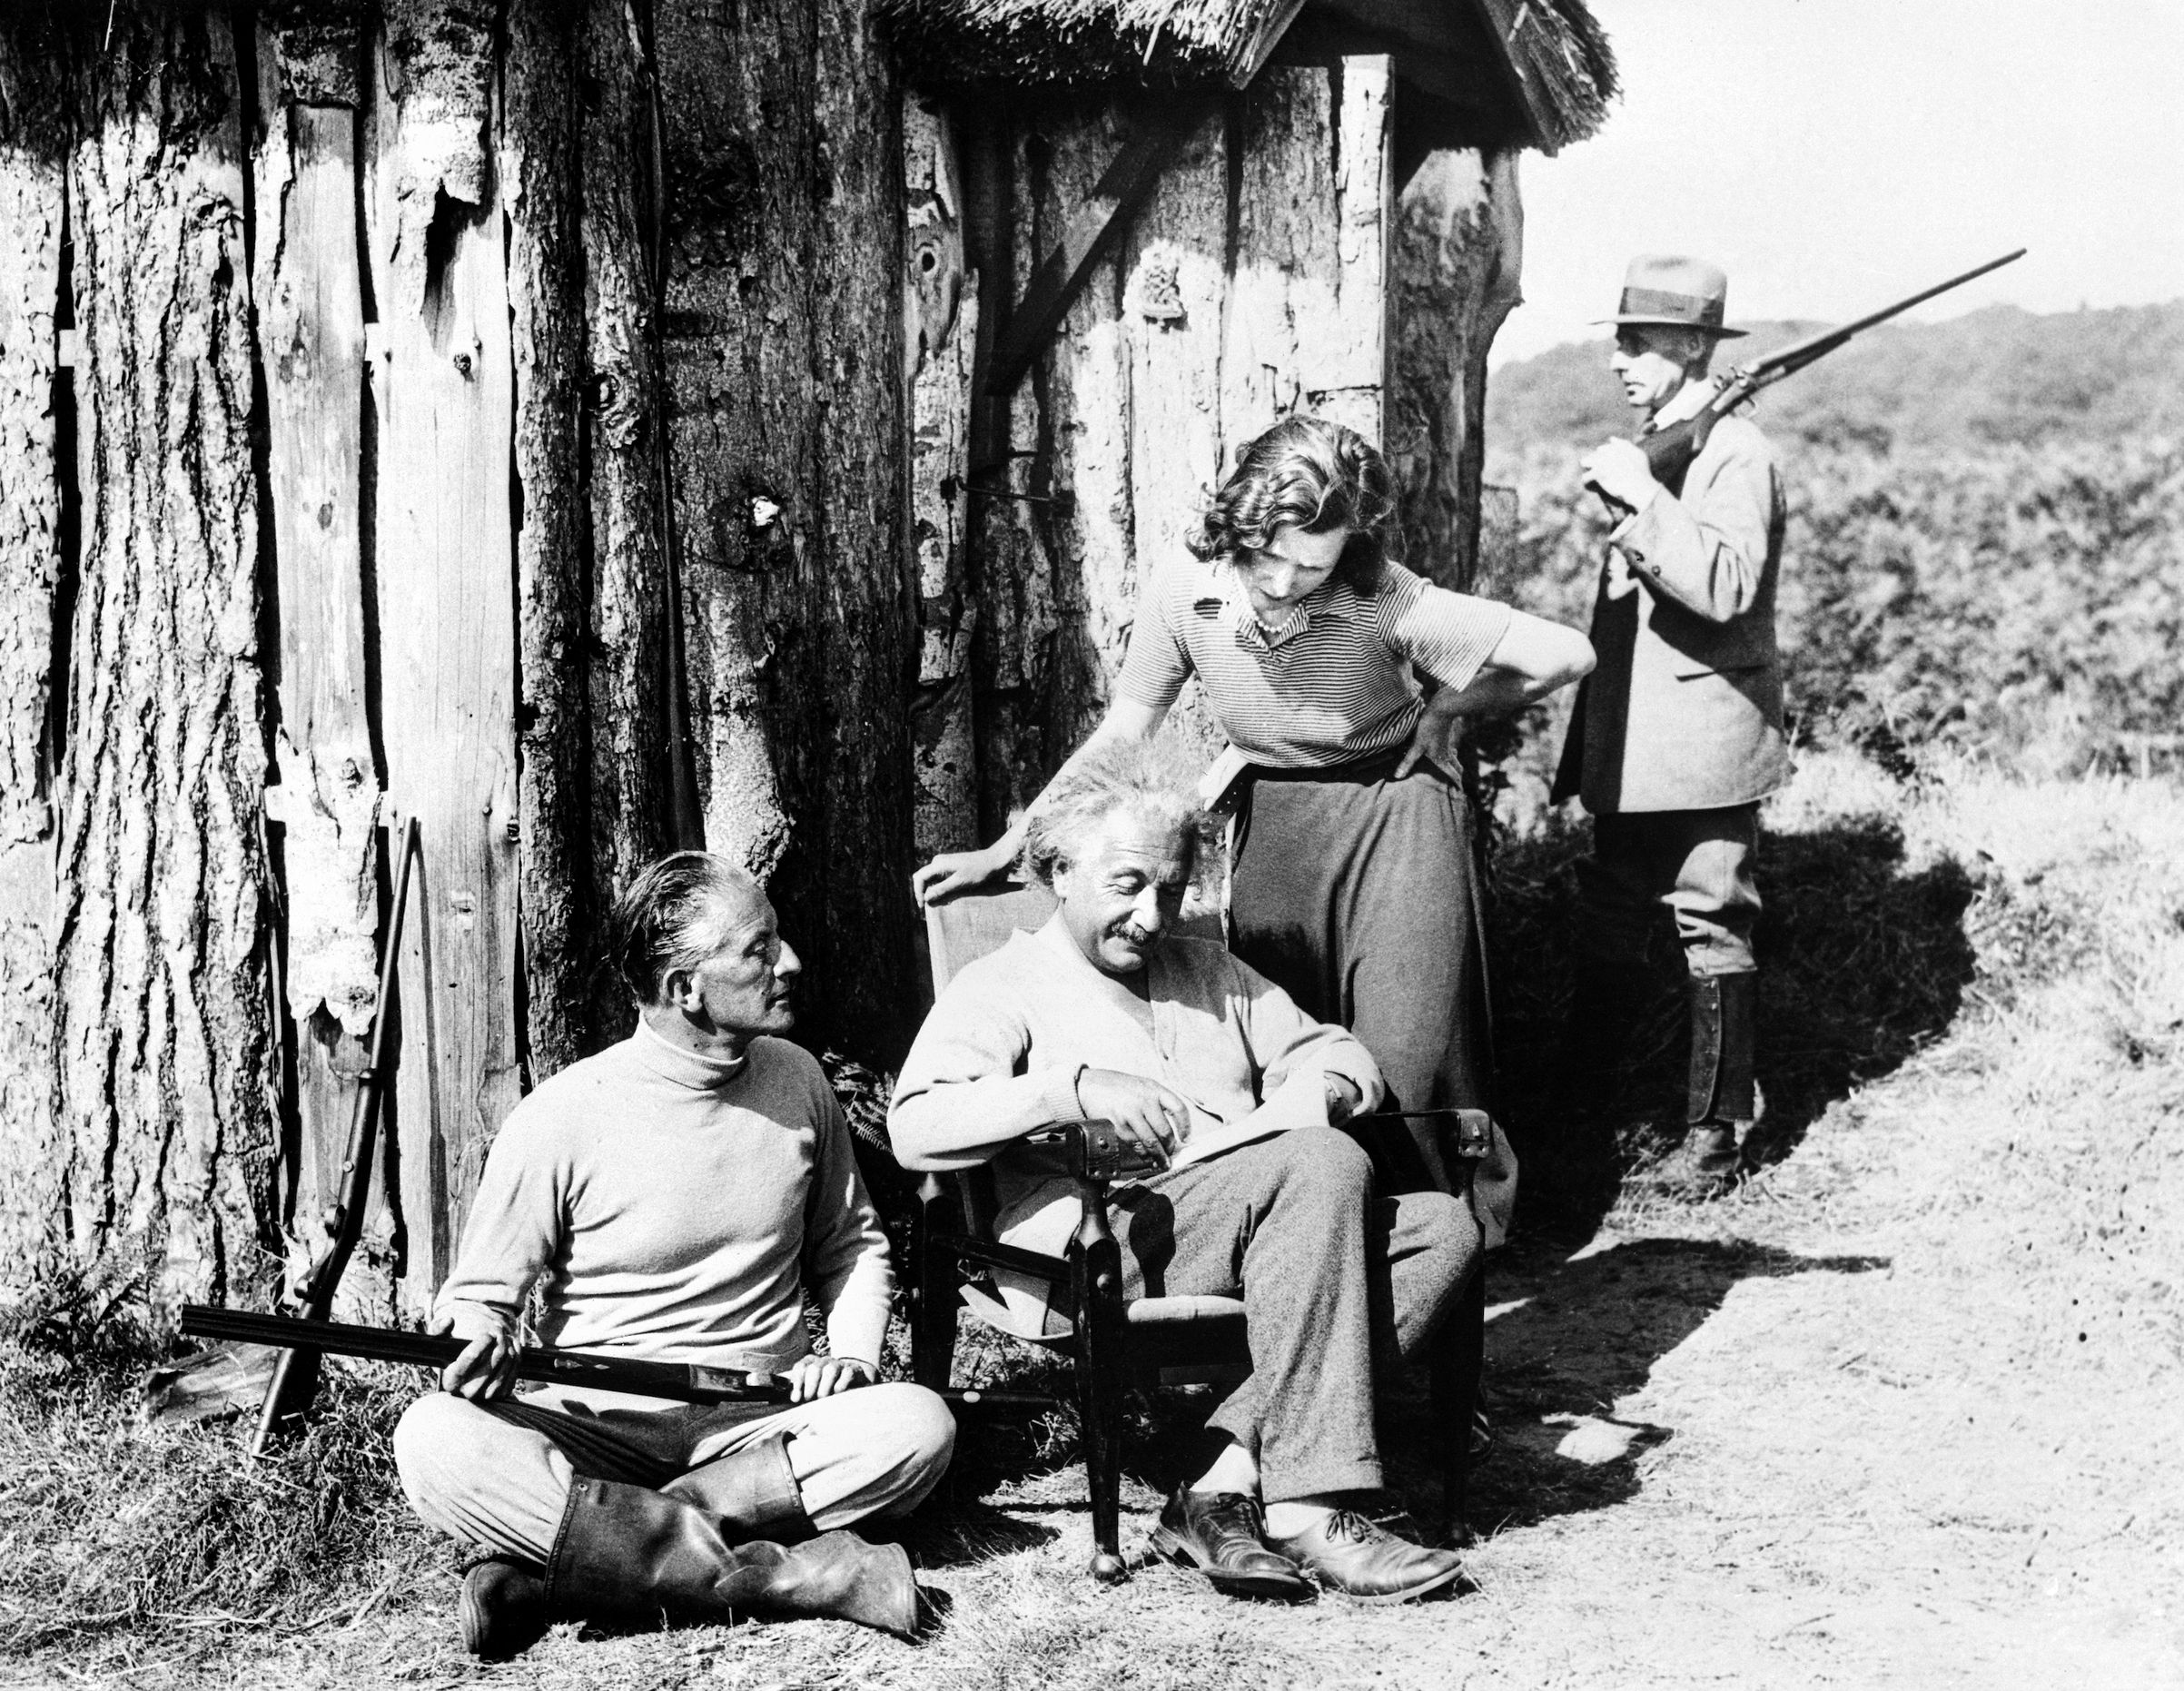 During his days in Great Britain, Albert Einstein is shown with his secretary, Miss B. Howard, and Commander Oliver Locker-Lampson, seated with a shotgun. The three are seen outside a holiday hut on the moors provided by Locker-Lampson. At the time, it was rumored that Hitler had placed a $5,000 price on Einstein’s head. After spending the summer of 1933 in Britain, Einstein relocated permanently to the United States.